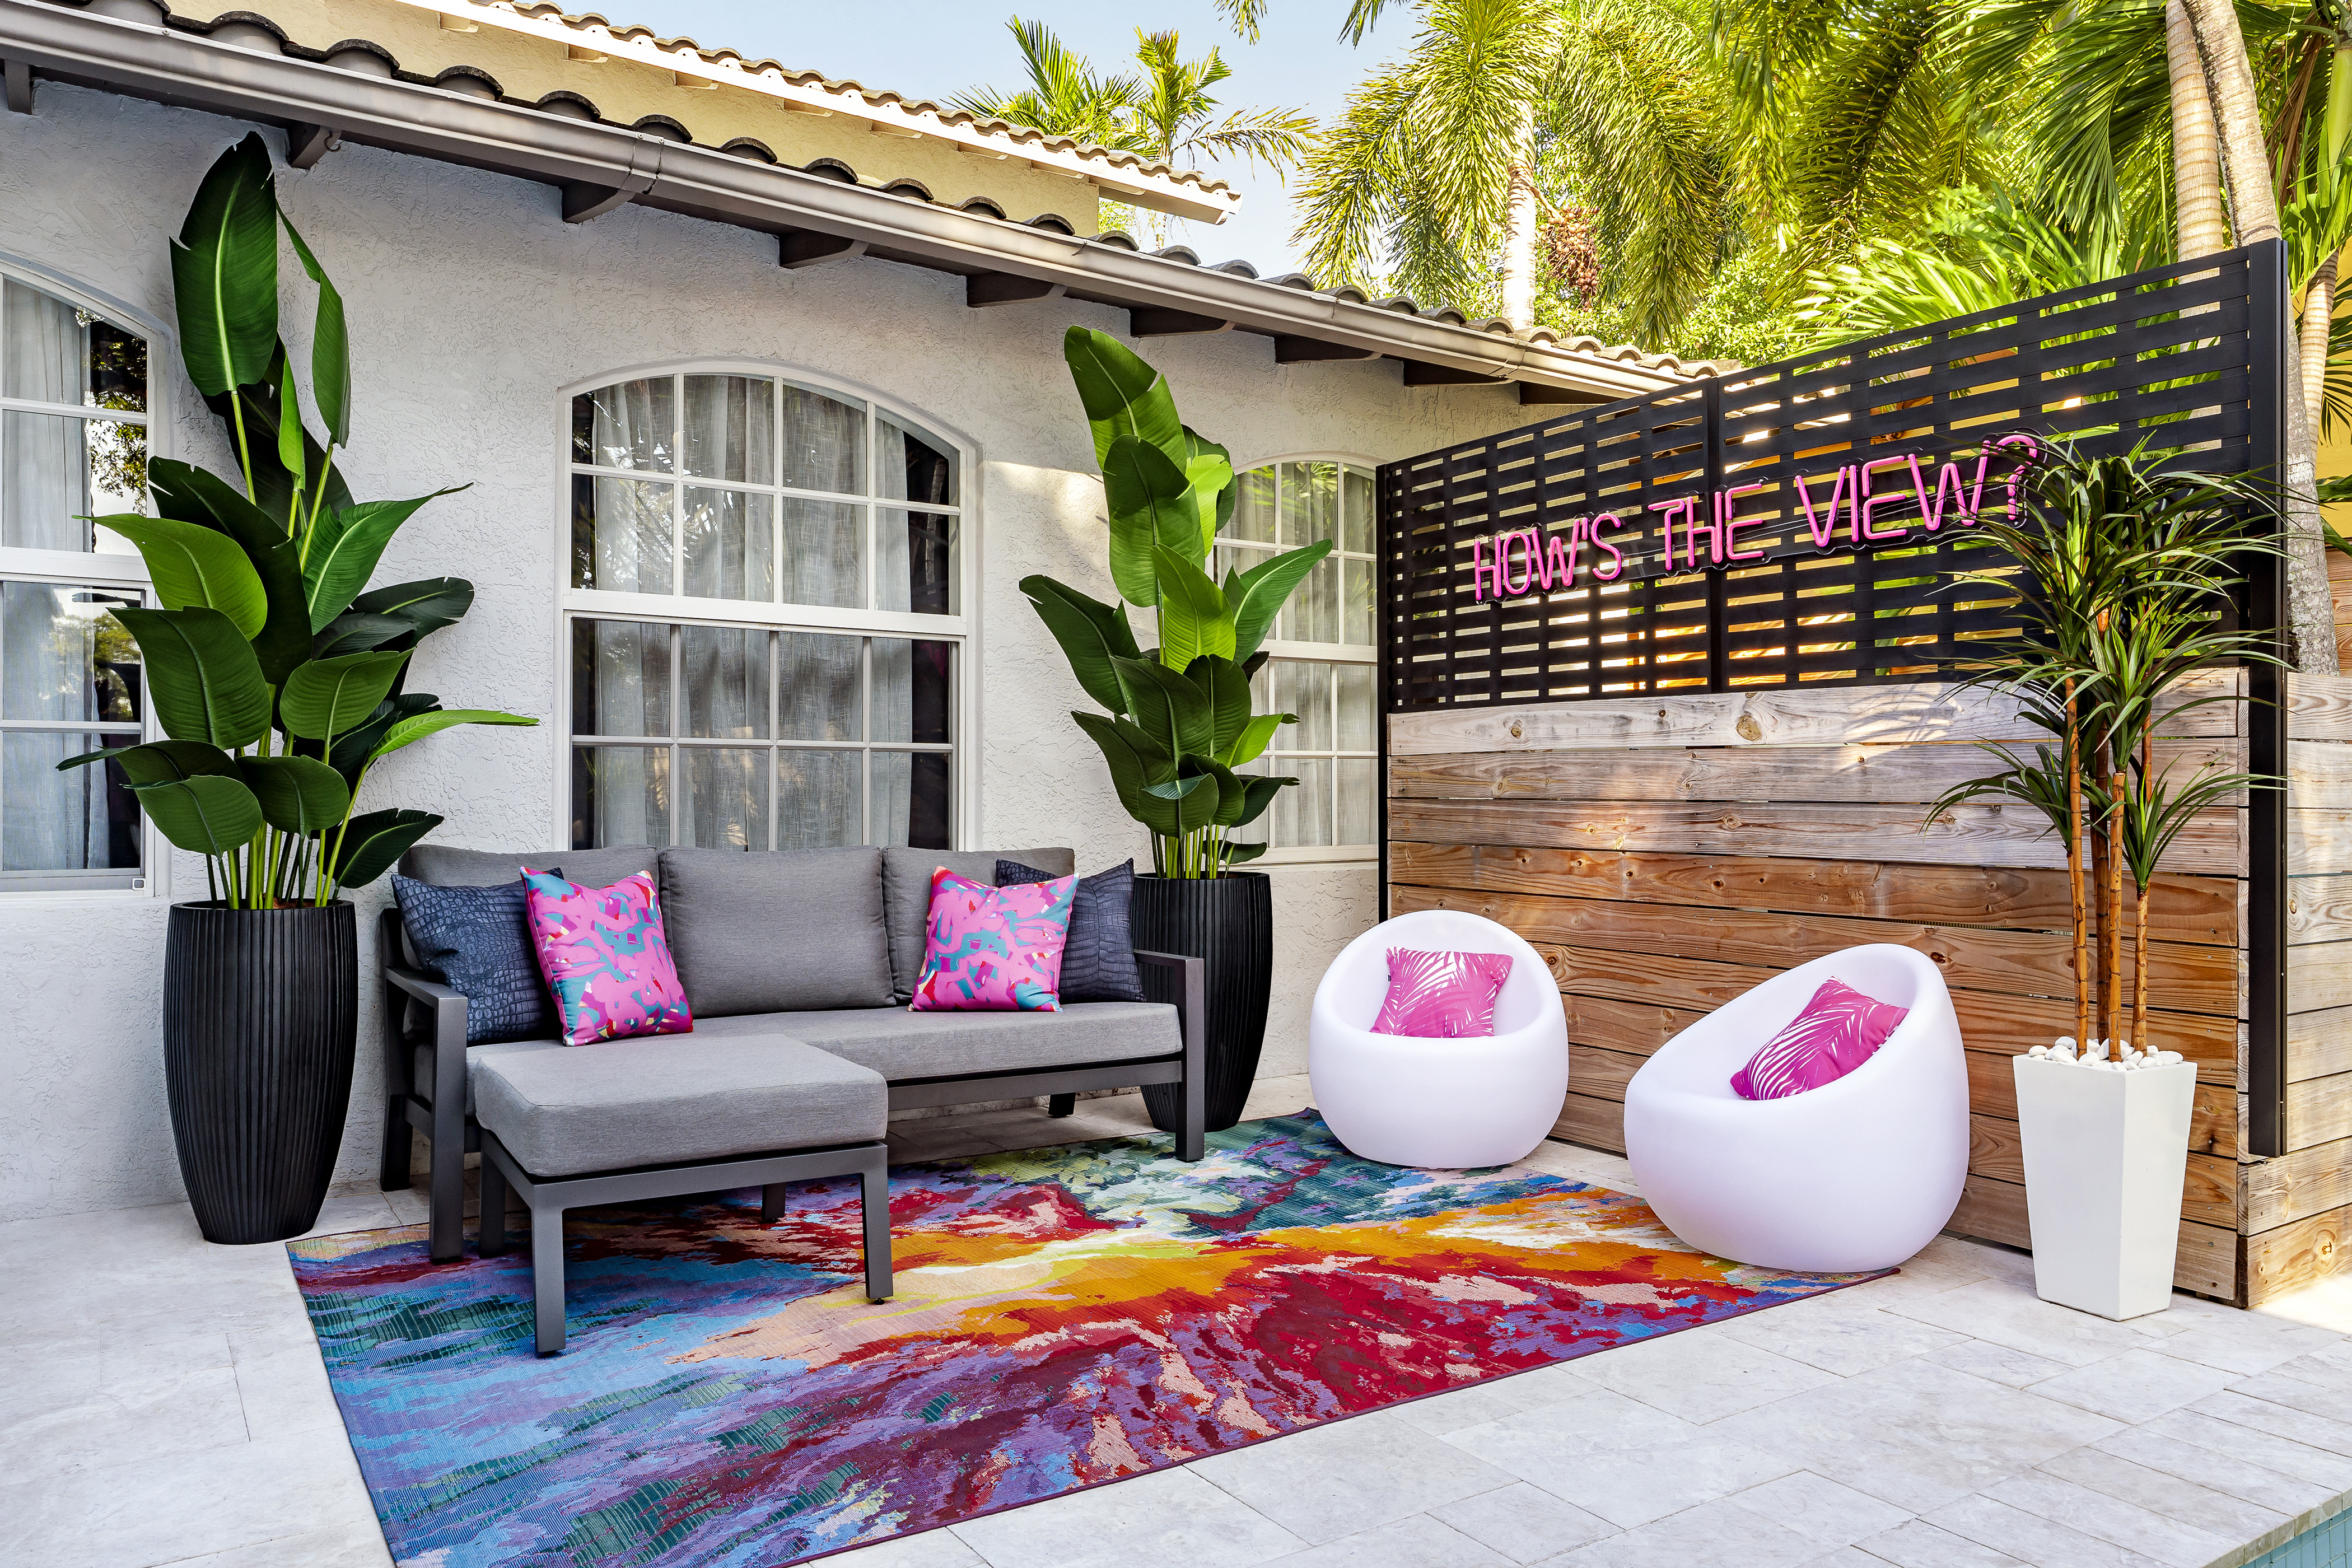 La La Land patio area with couch, chairs and neon sign